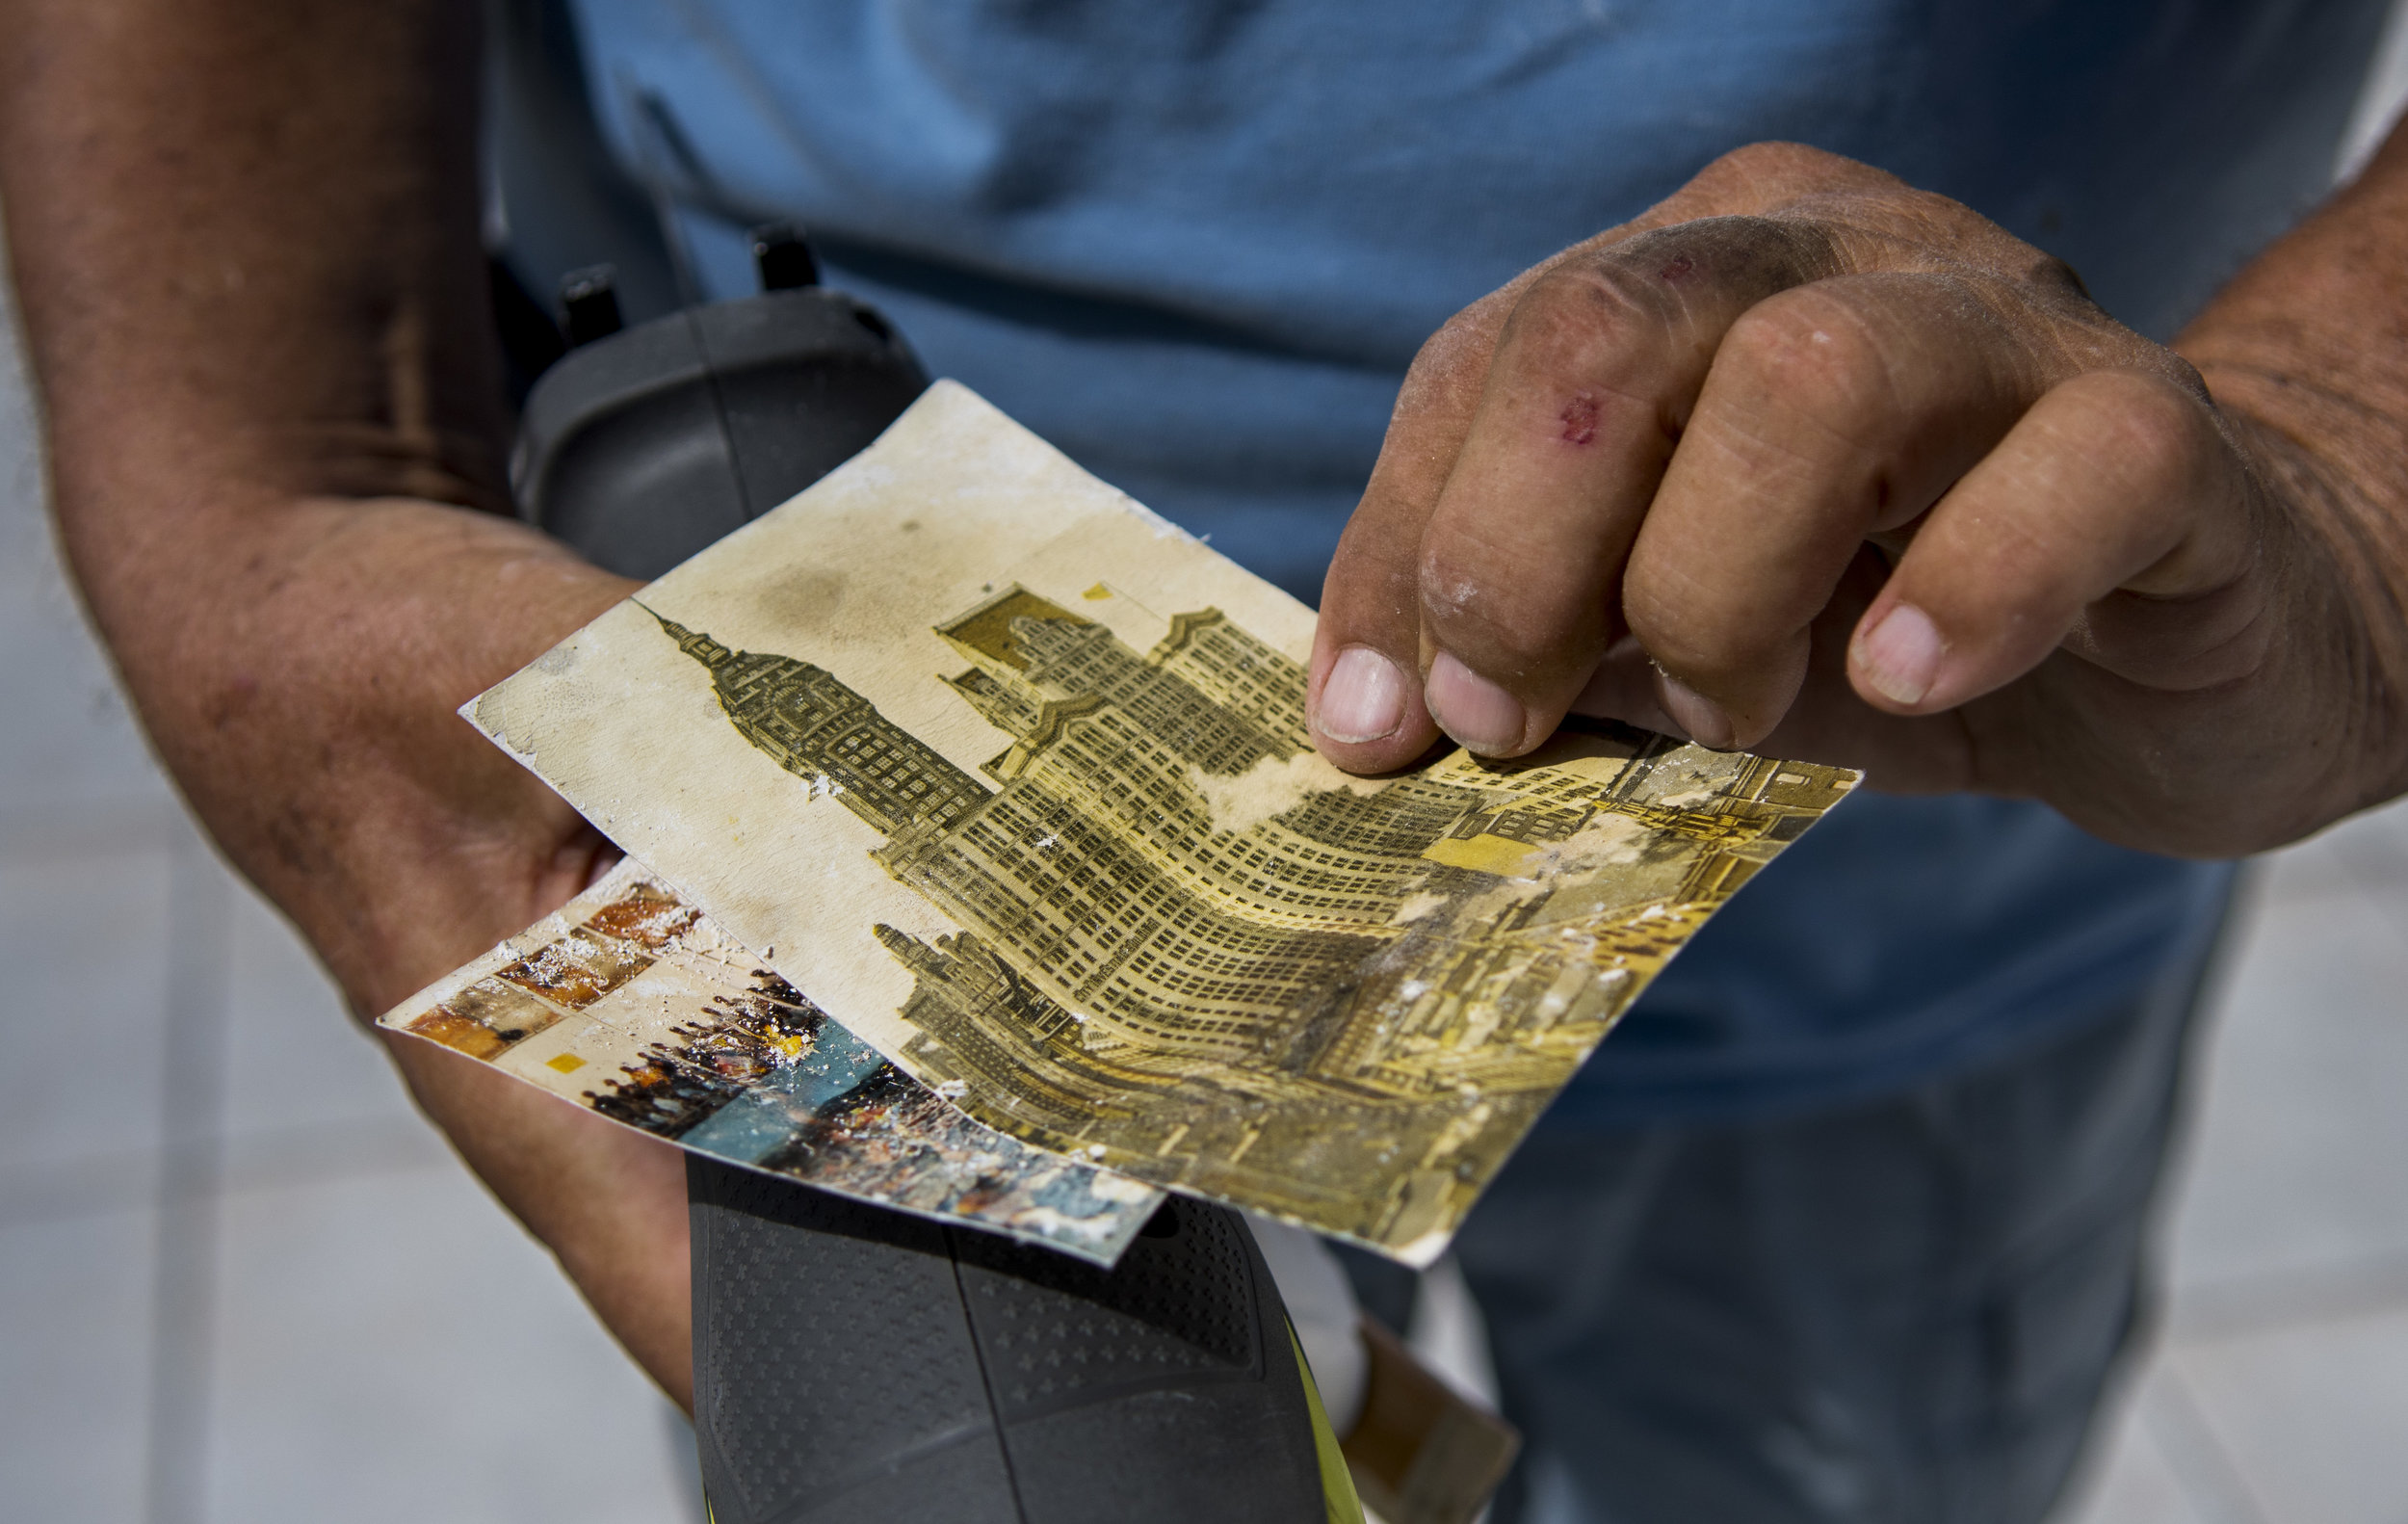  Charlie Chappell examines postcards he recovered from the remains of his home on Big Pine Key. The postcards are from his mother's trip to see the empire state building in 1912. 